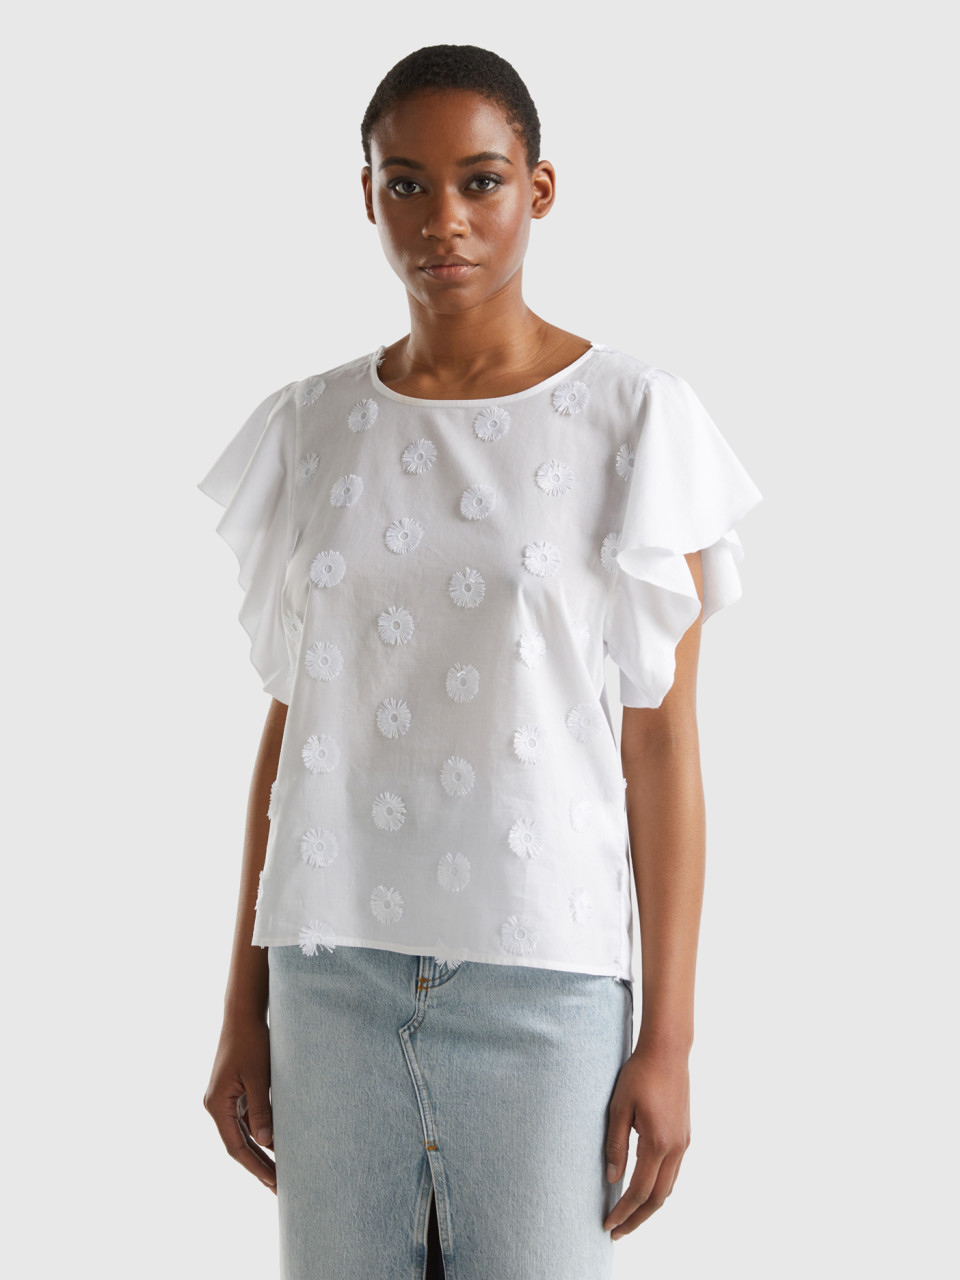 Benetton, T-shirt With Embroidered Flowers, White, Women